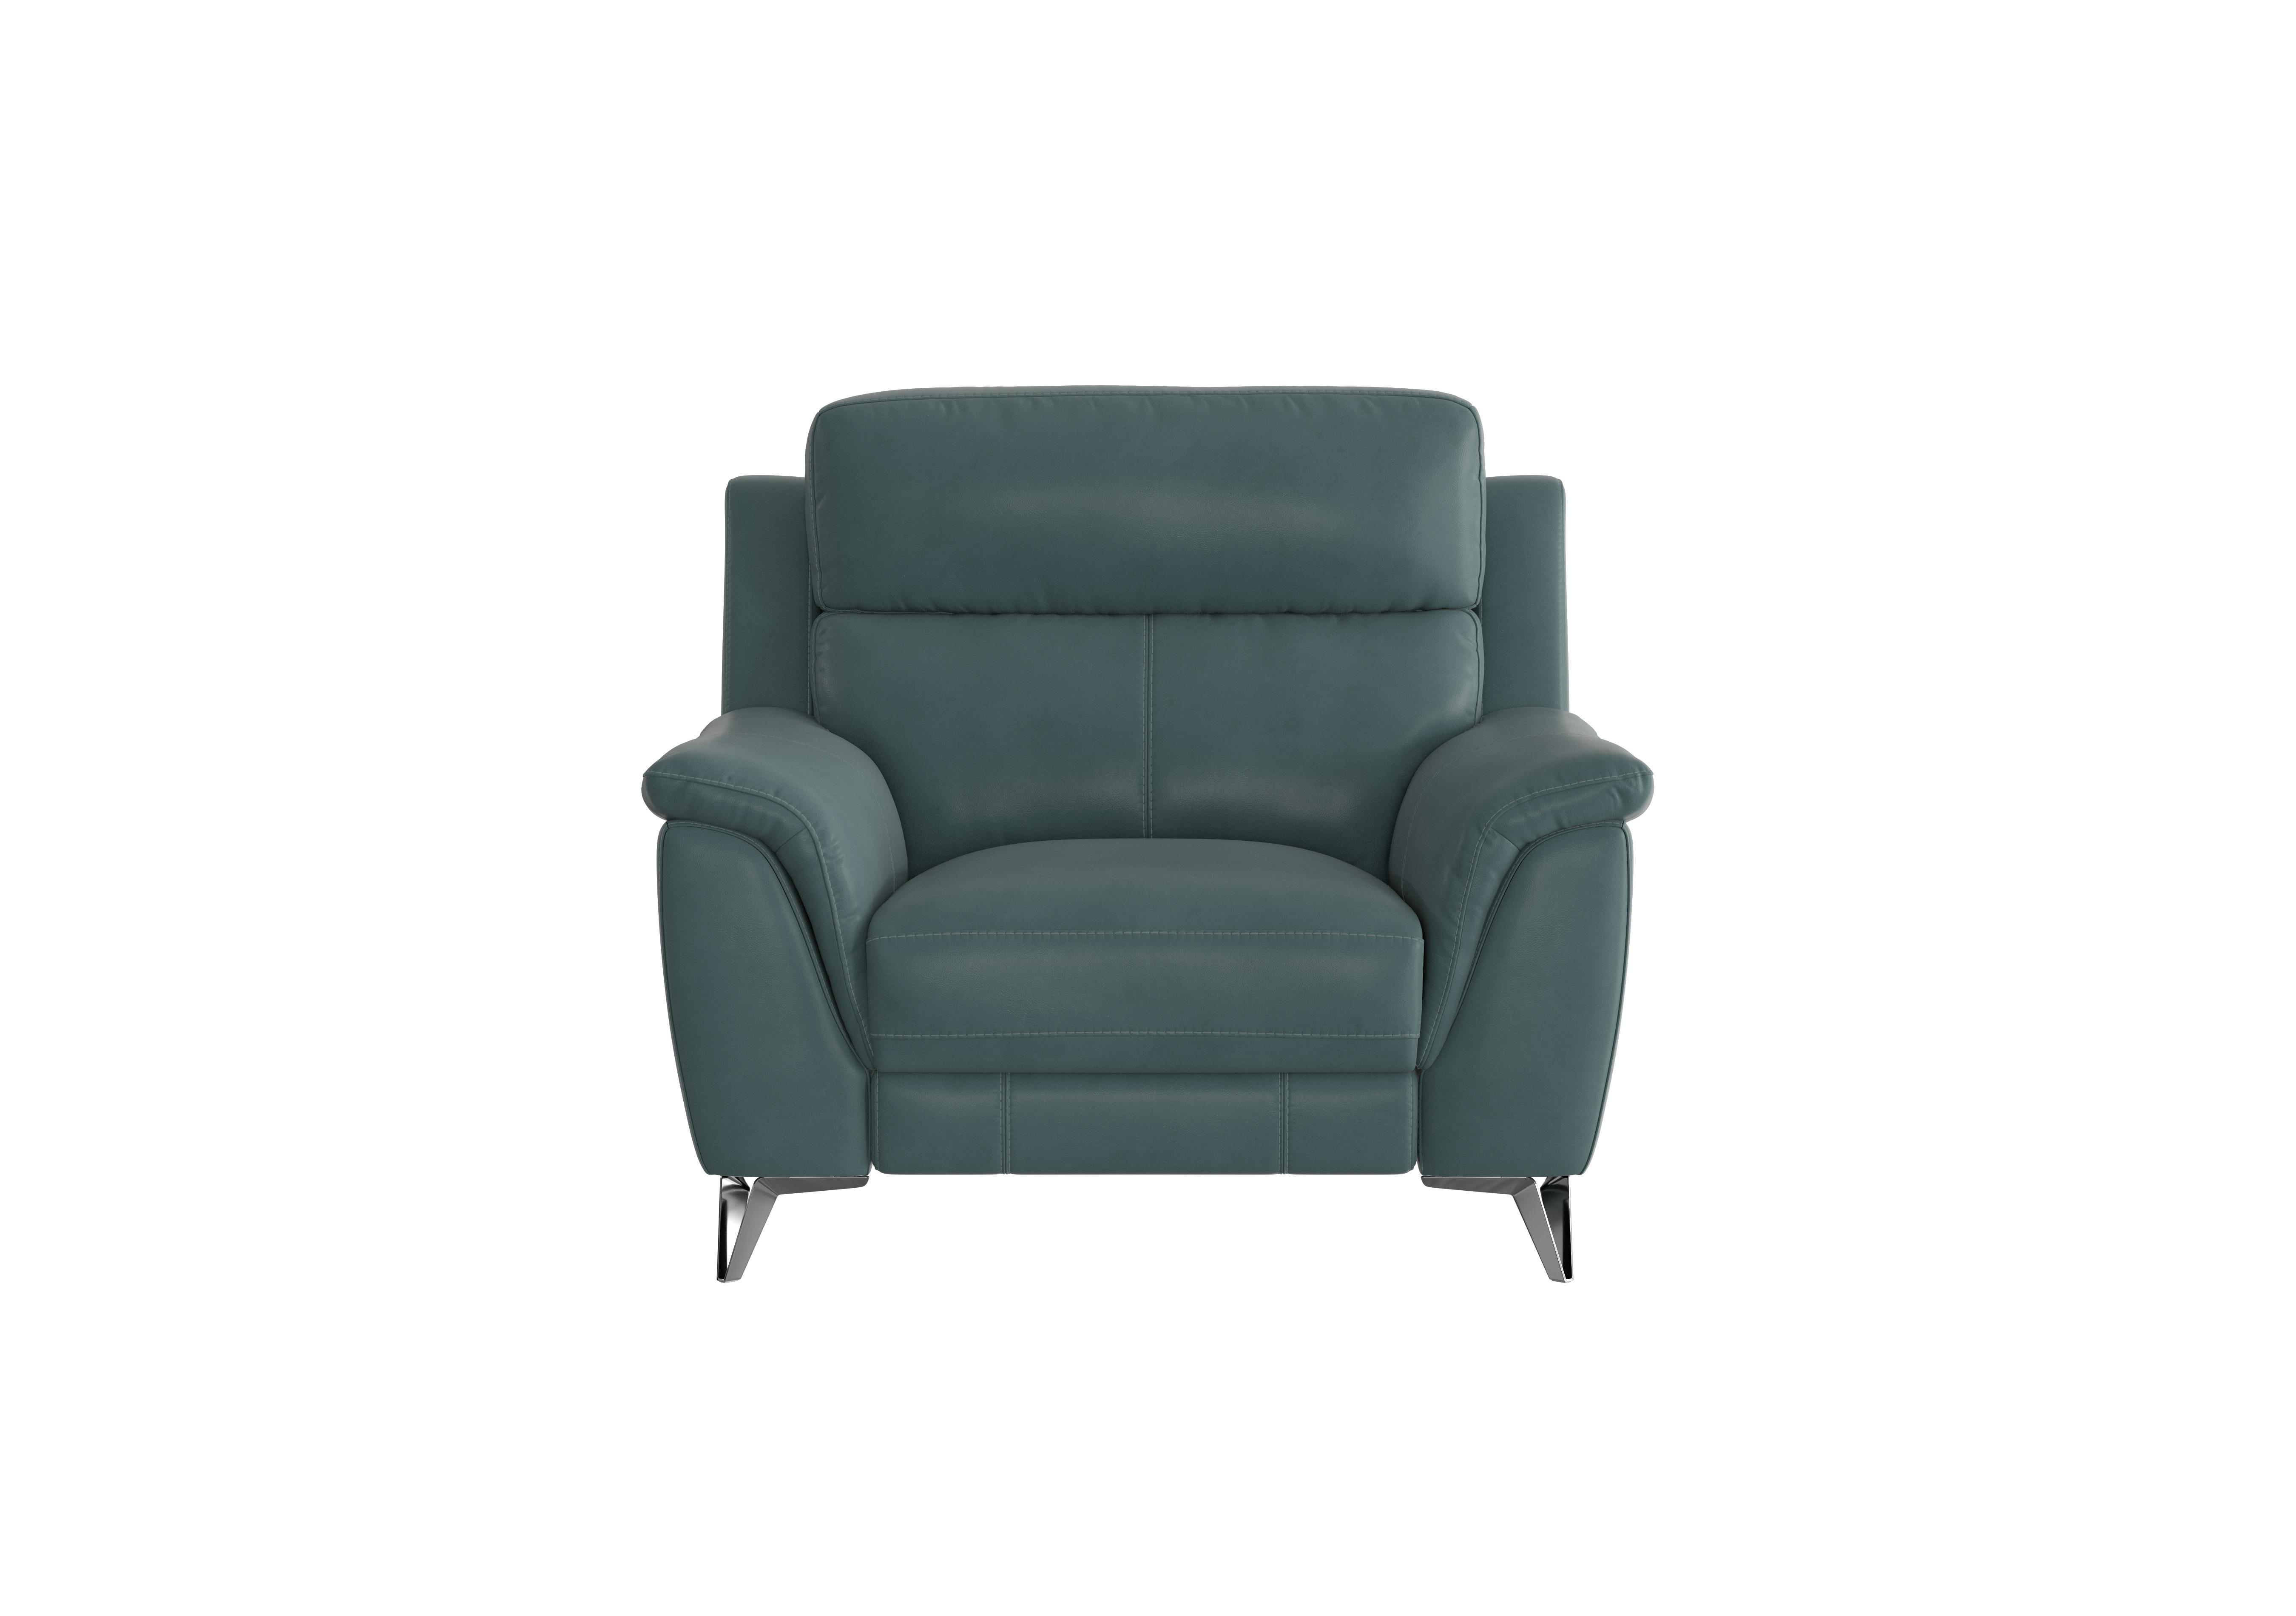 Contempo Leather Armchair in Bv-301e Lake Green on Furniture Village